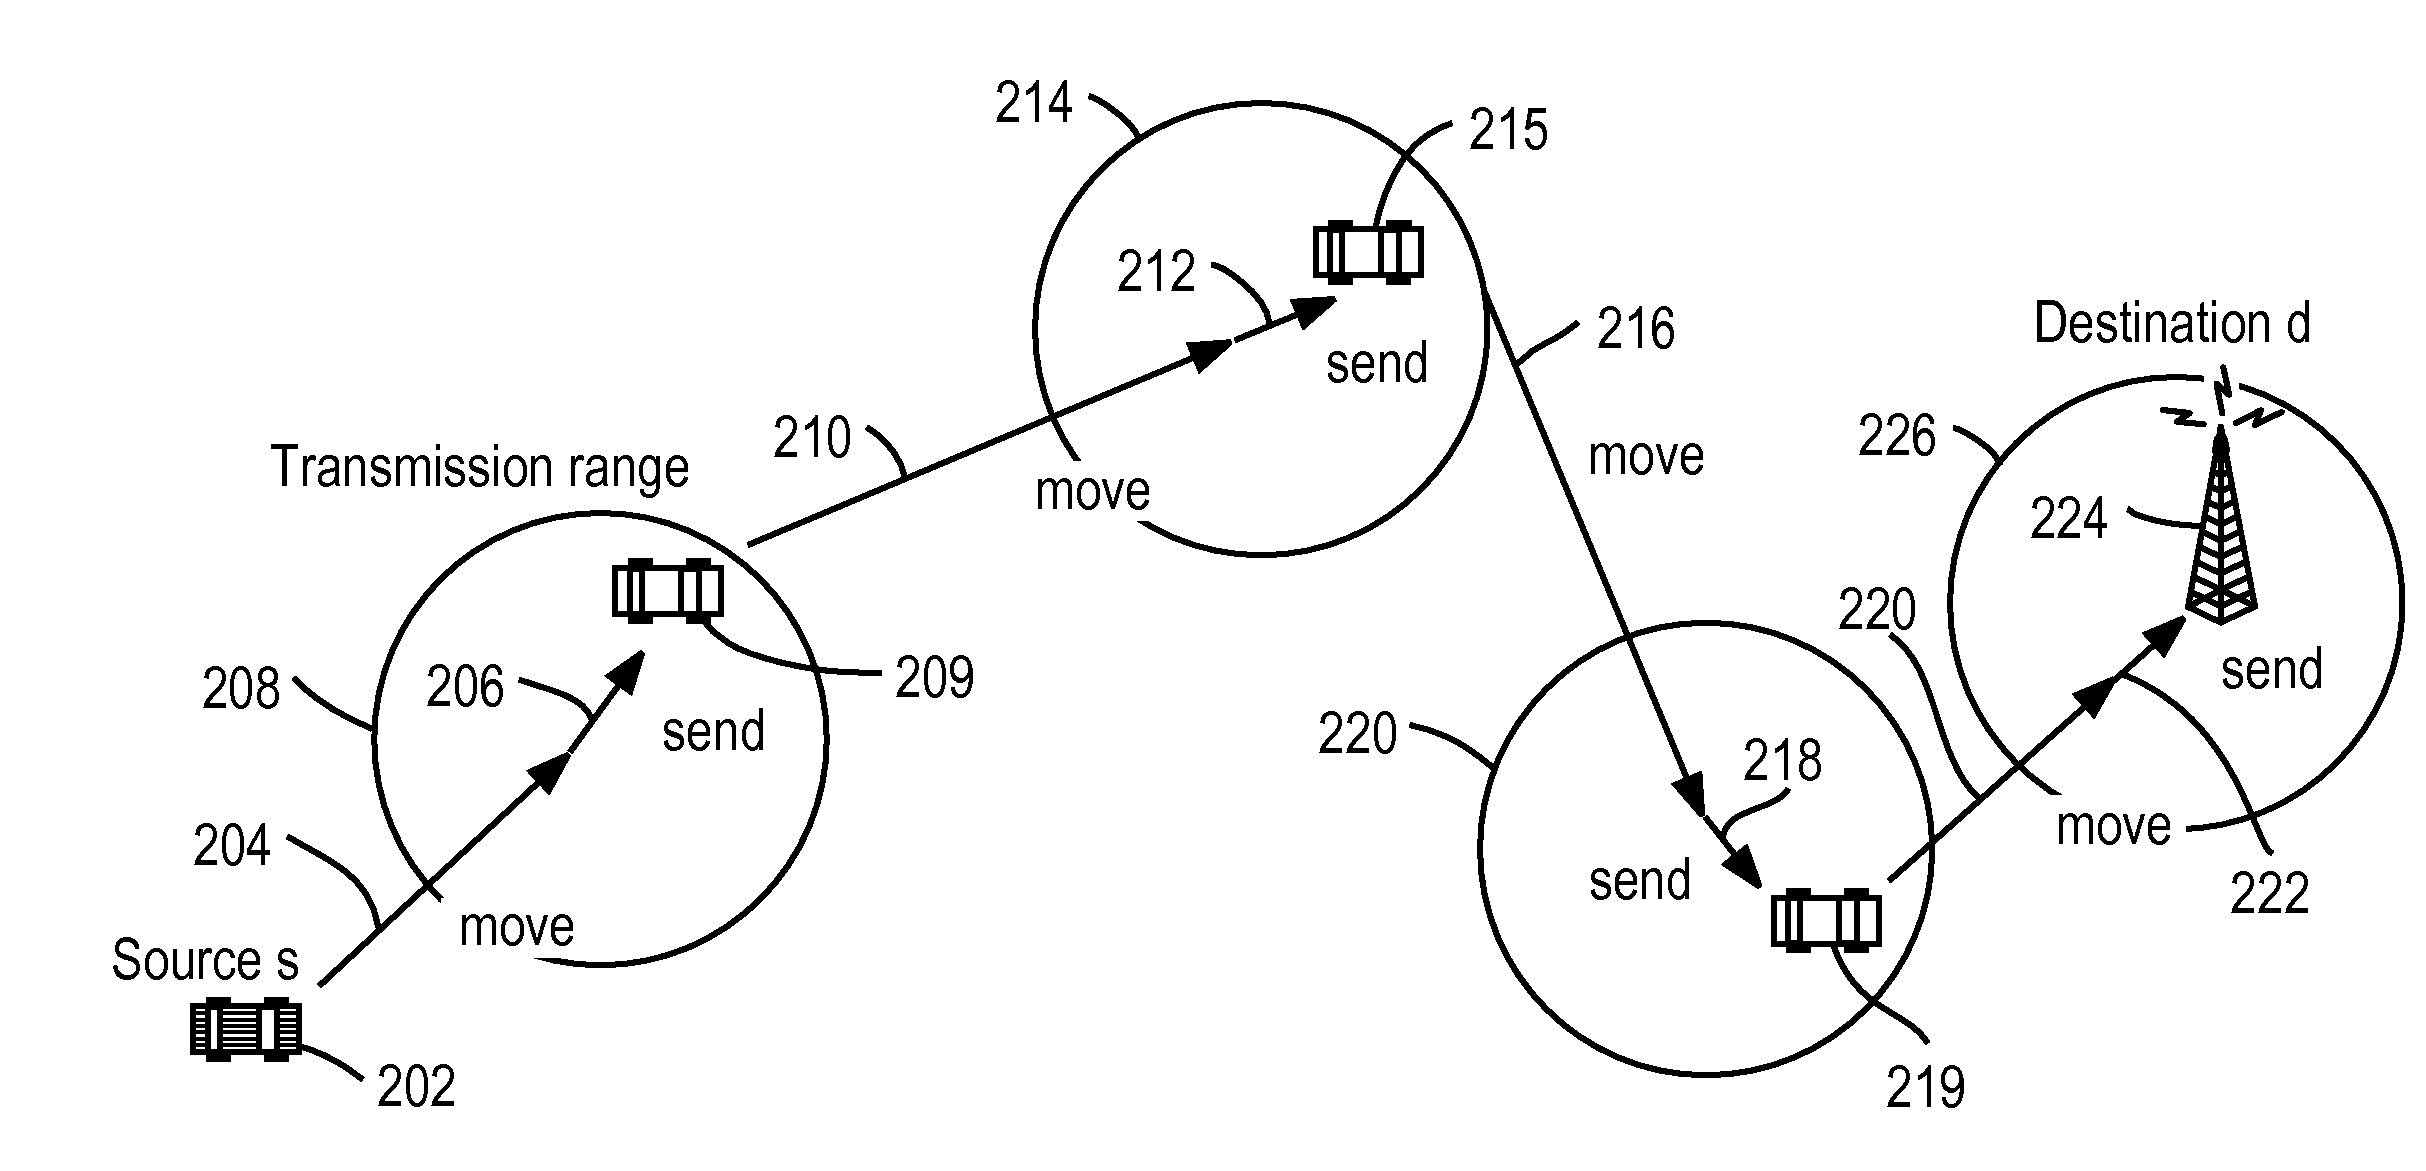 Probabilistic routing for vehicular ad hoc network